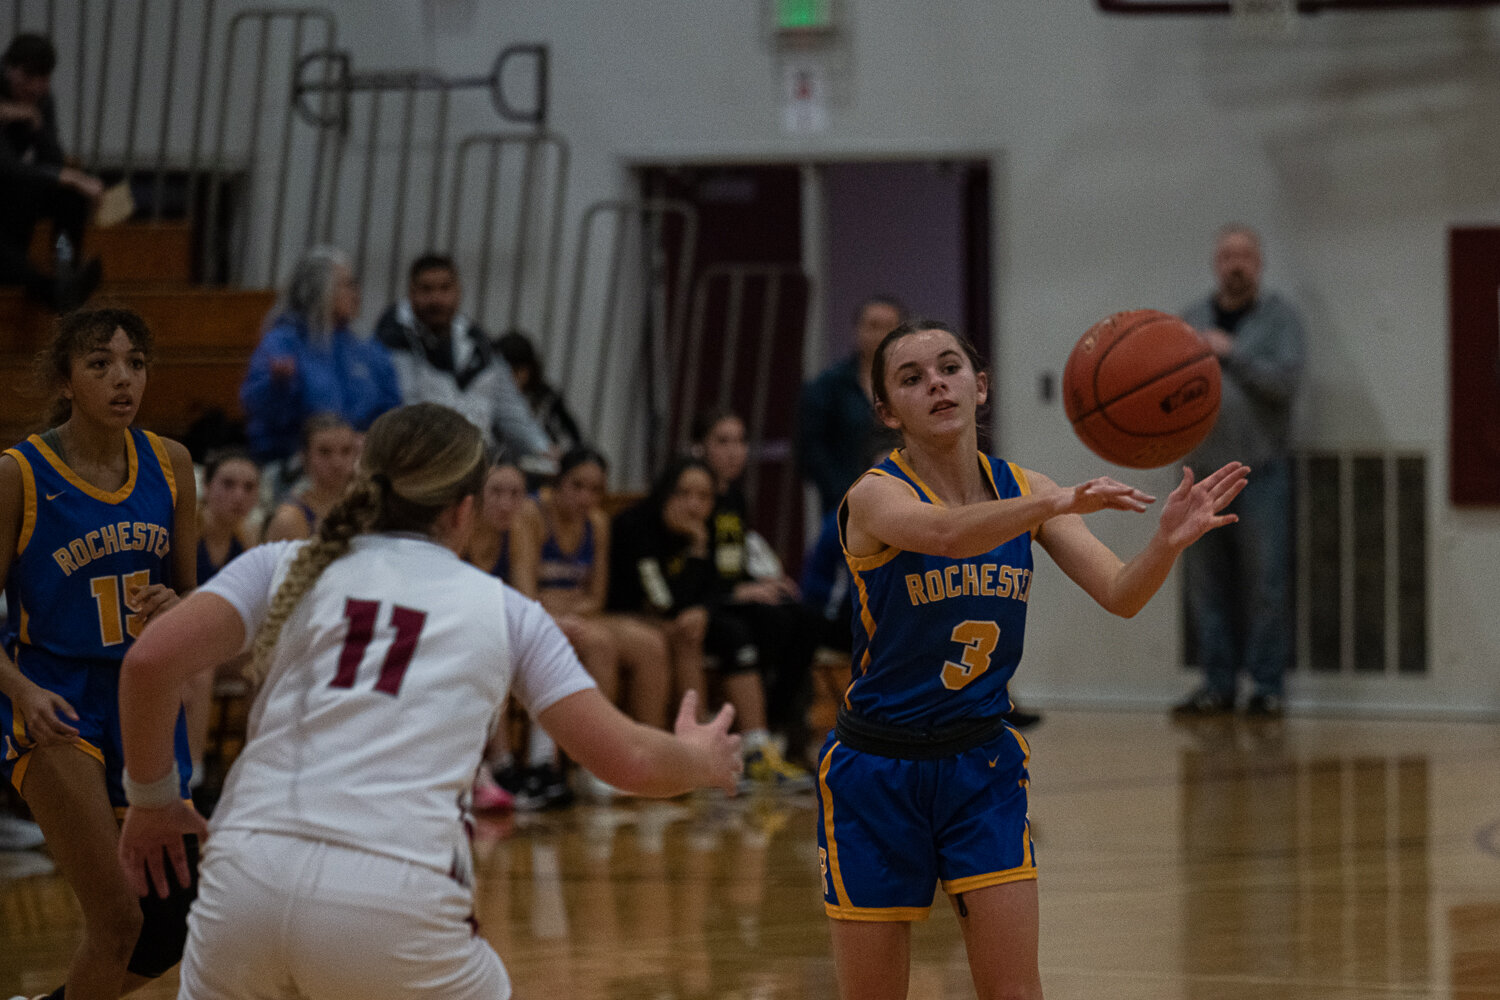 Sara Haury passes the ball to a teammate during Rochester's loss at W.F. West on Dec. 6.